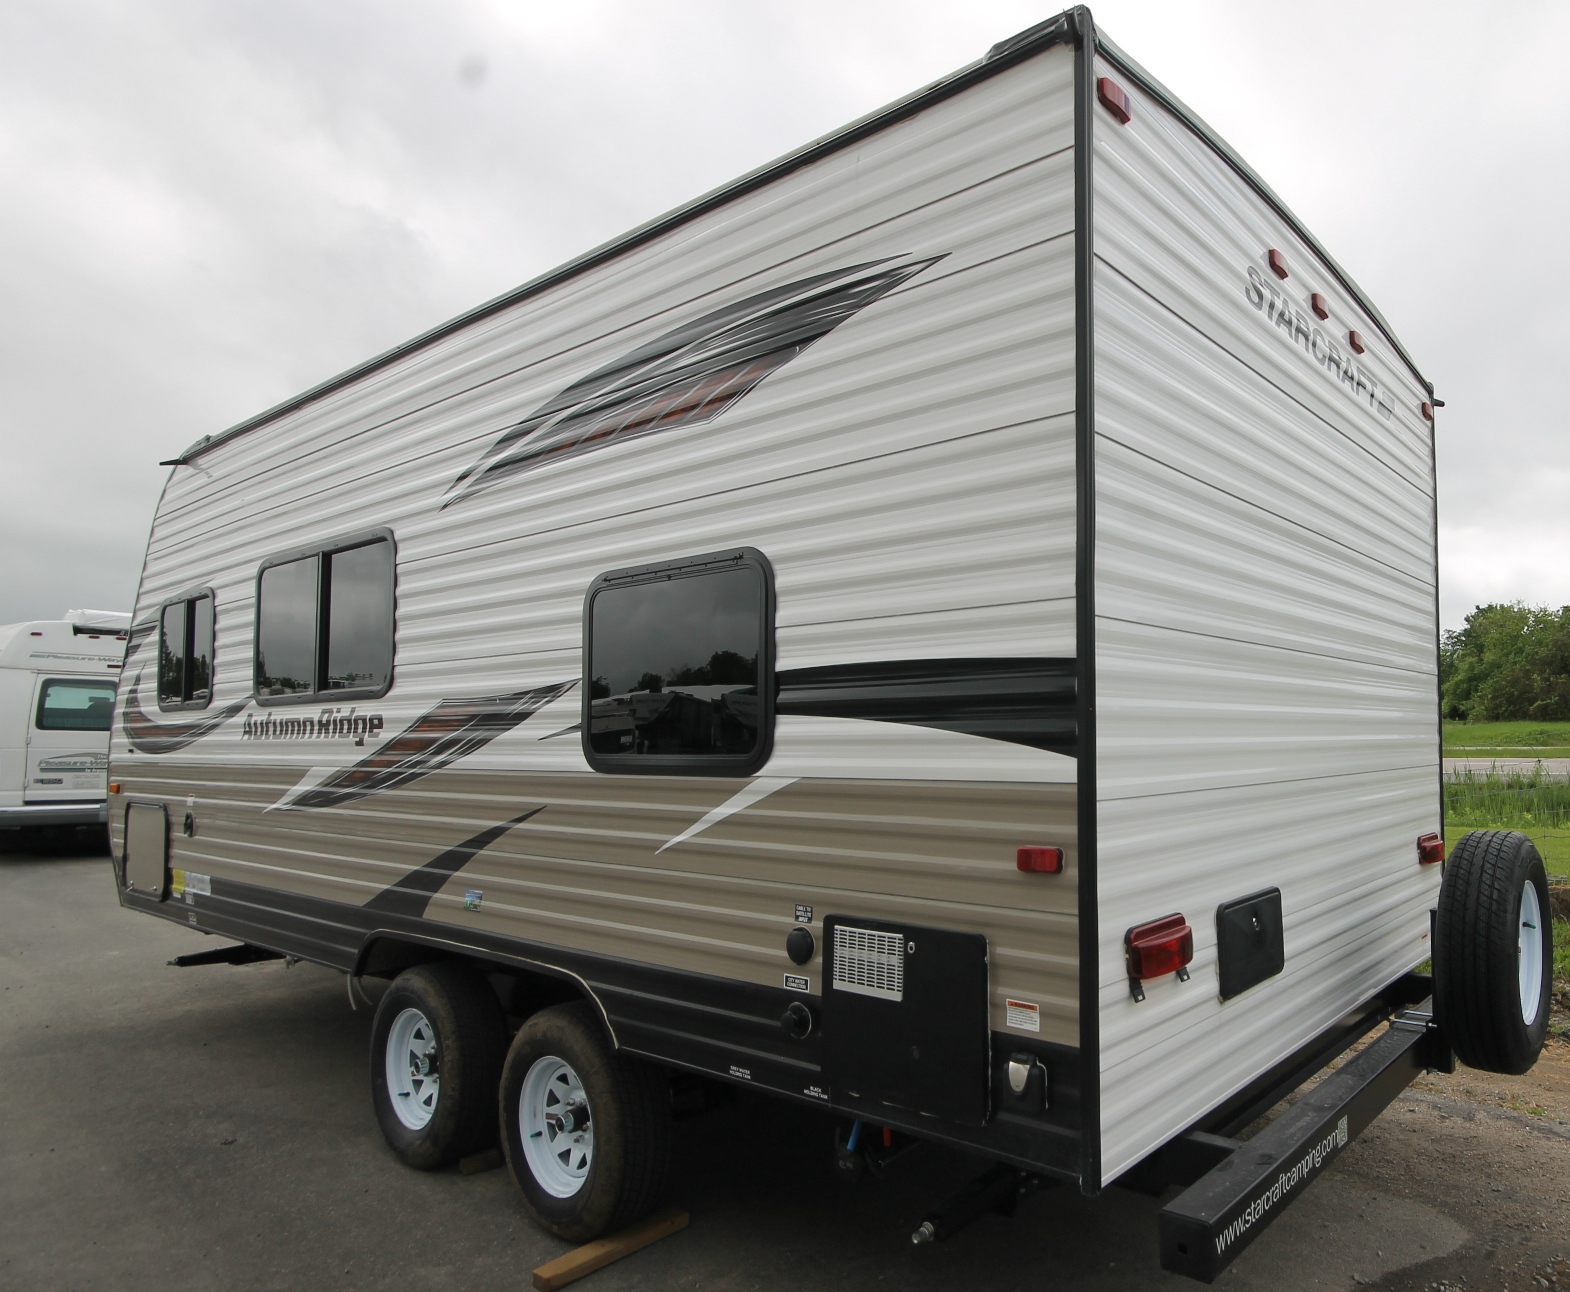 New and Used RV Travel Trailers for Sale - RVHotline Canada RV Trader